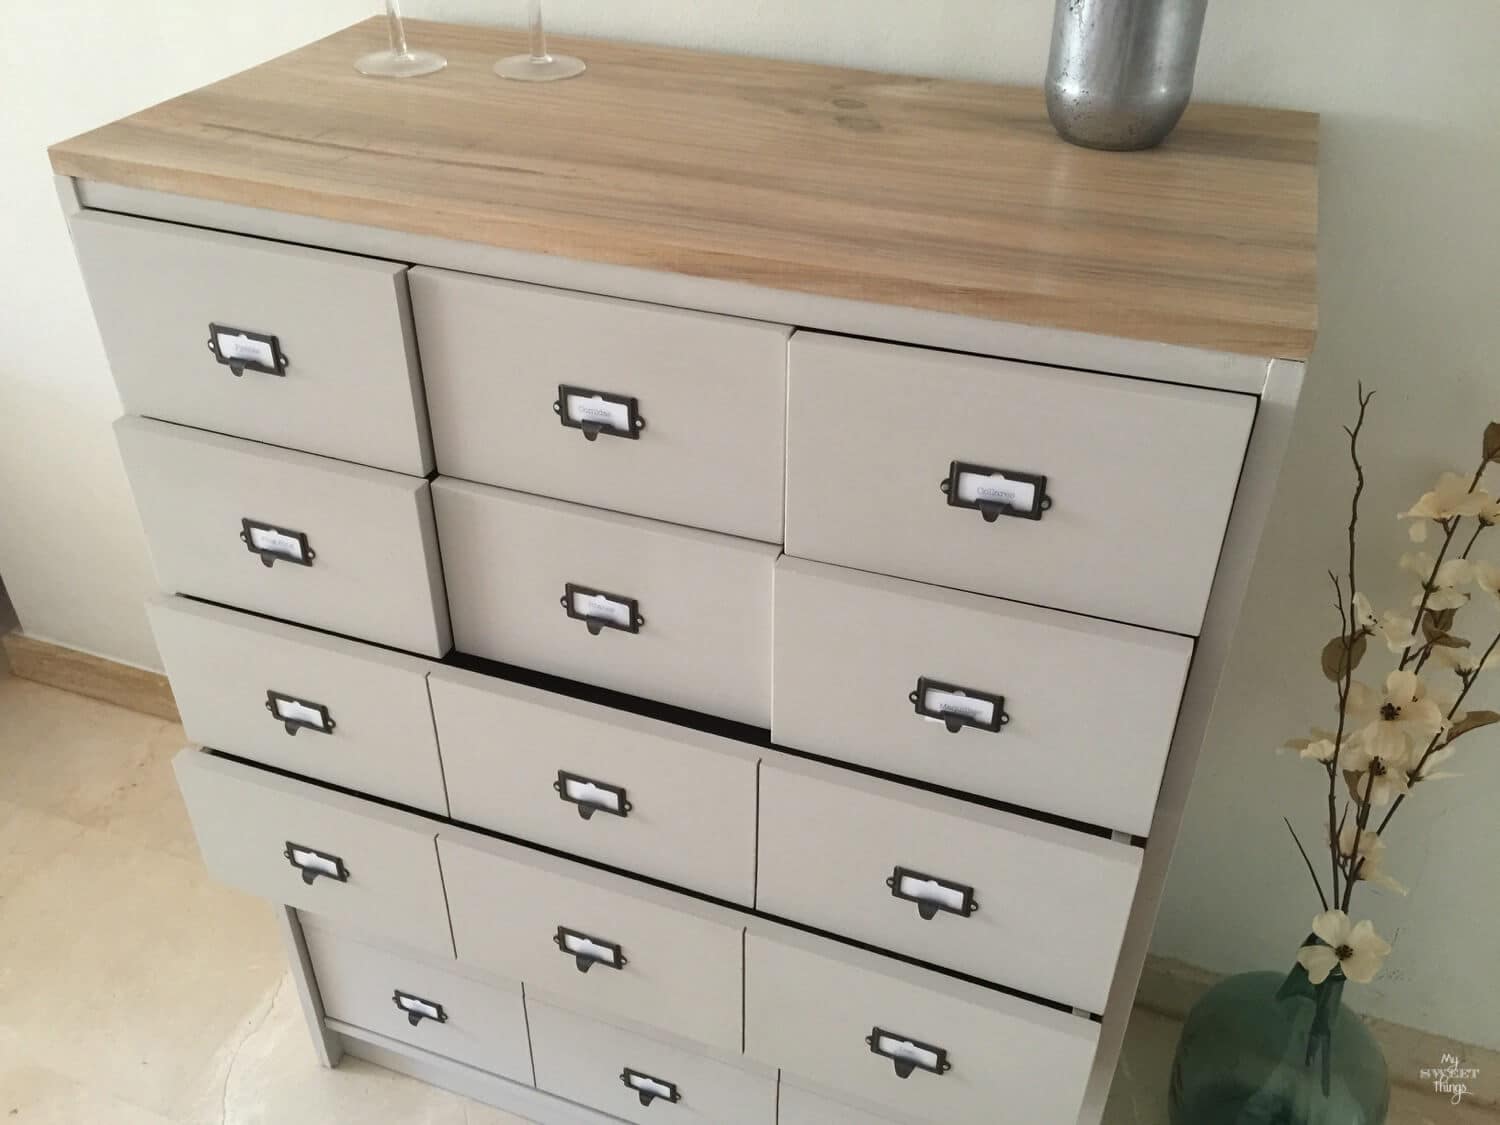 How to turn an old dresser into a faux card catalog the easy and cheap way